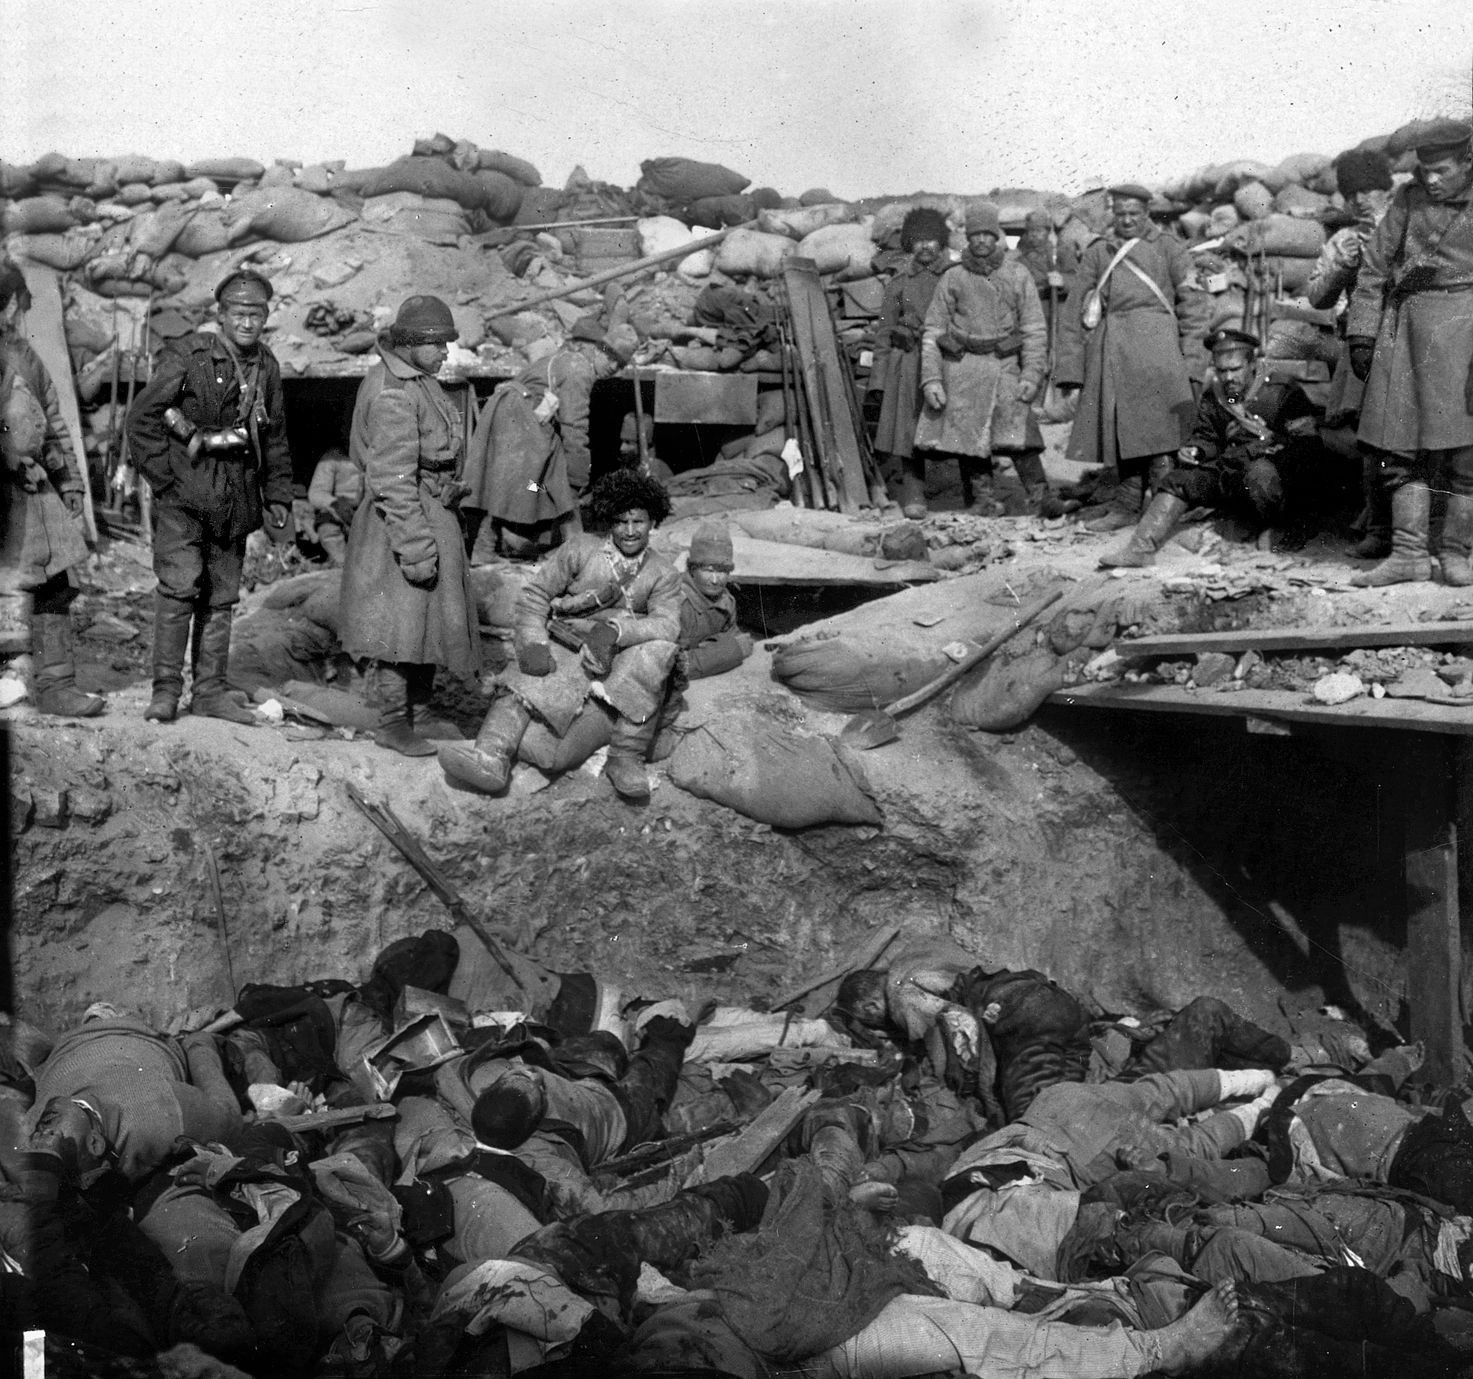 Russian defenders loom over a trench filled with dead Japanese soldiers. The “banzai spirit” cost the Japanese greatly.